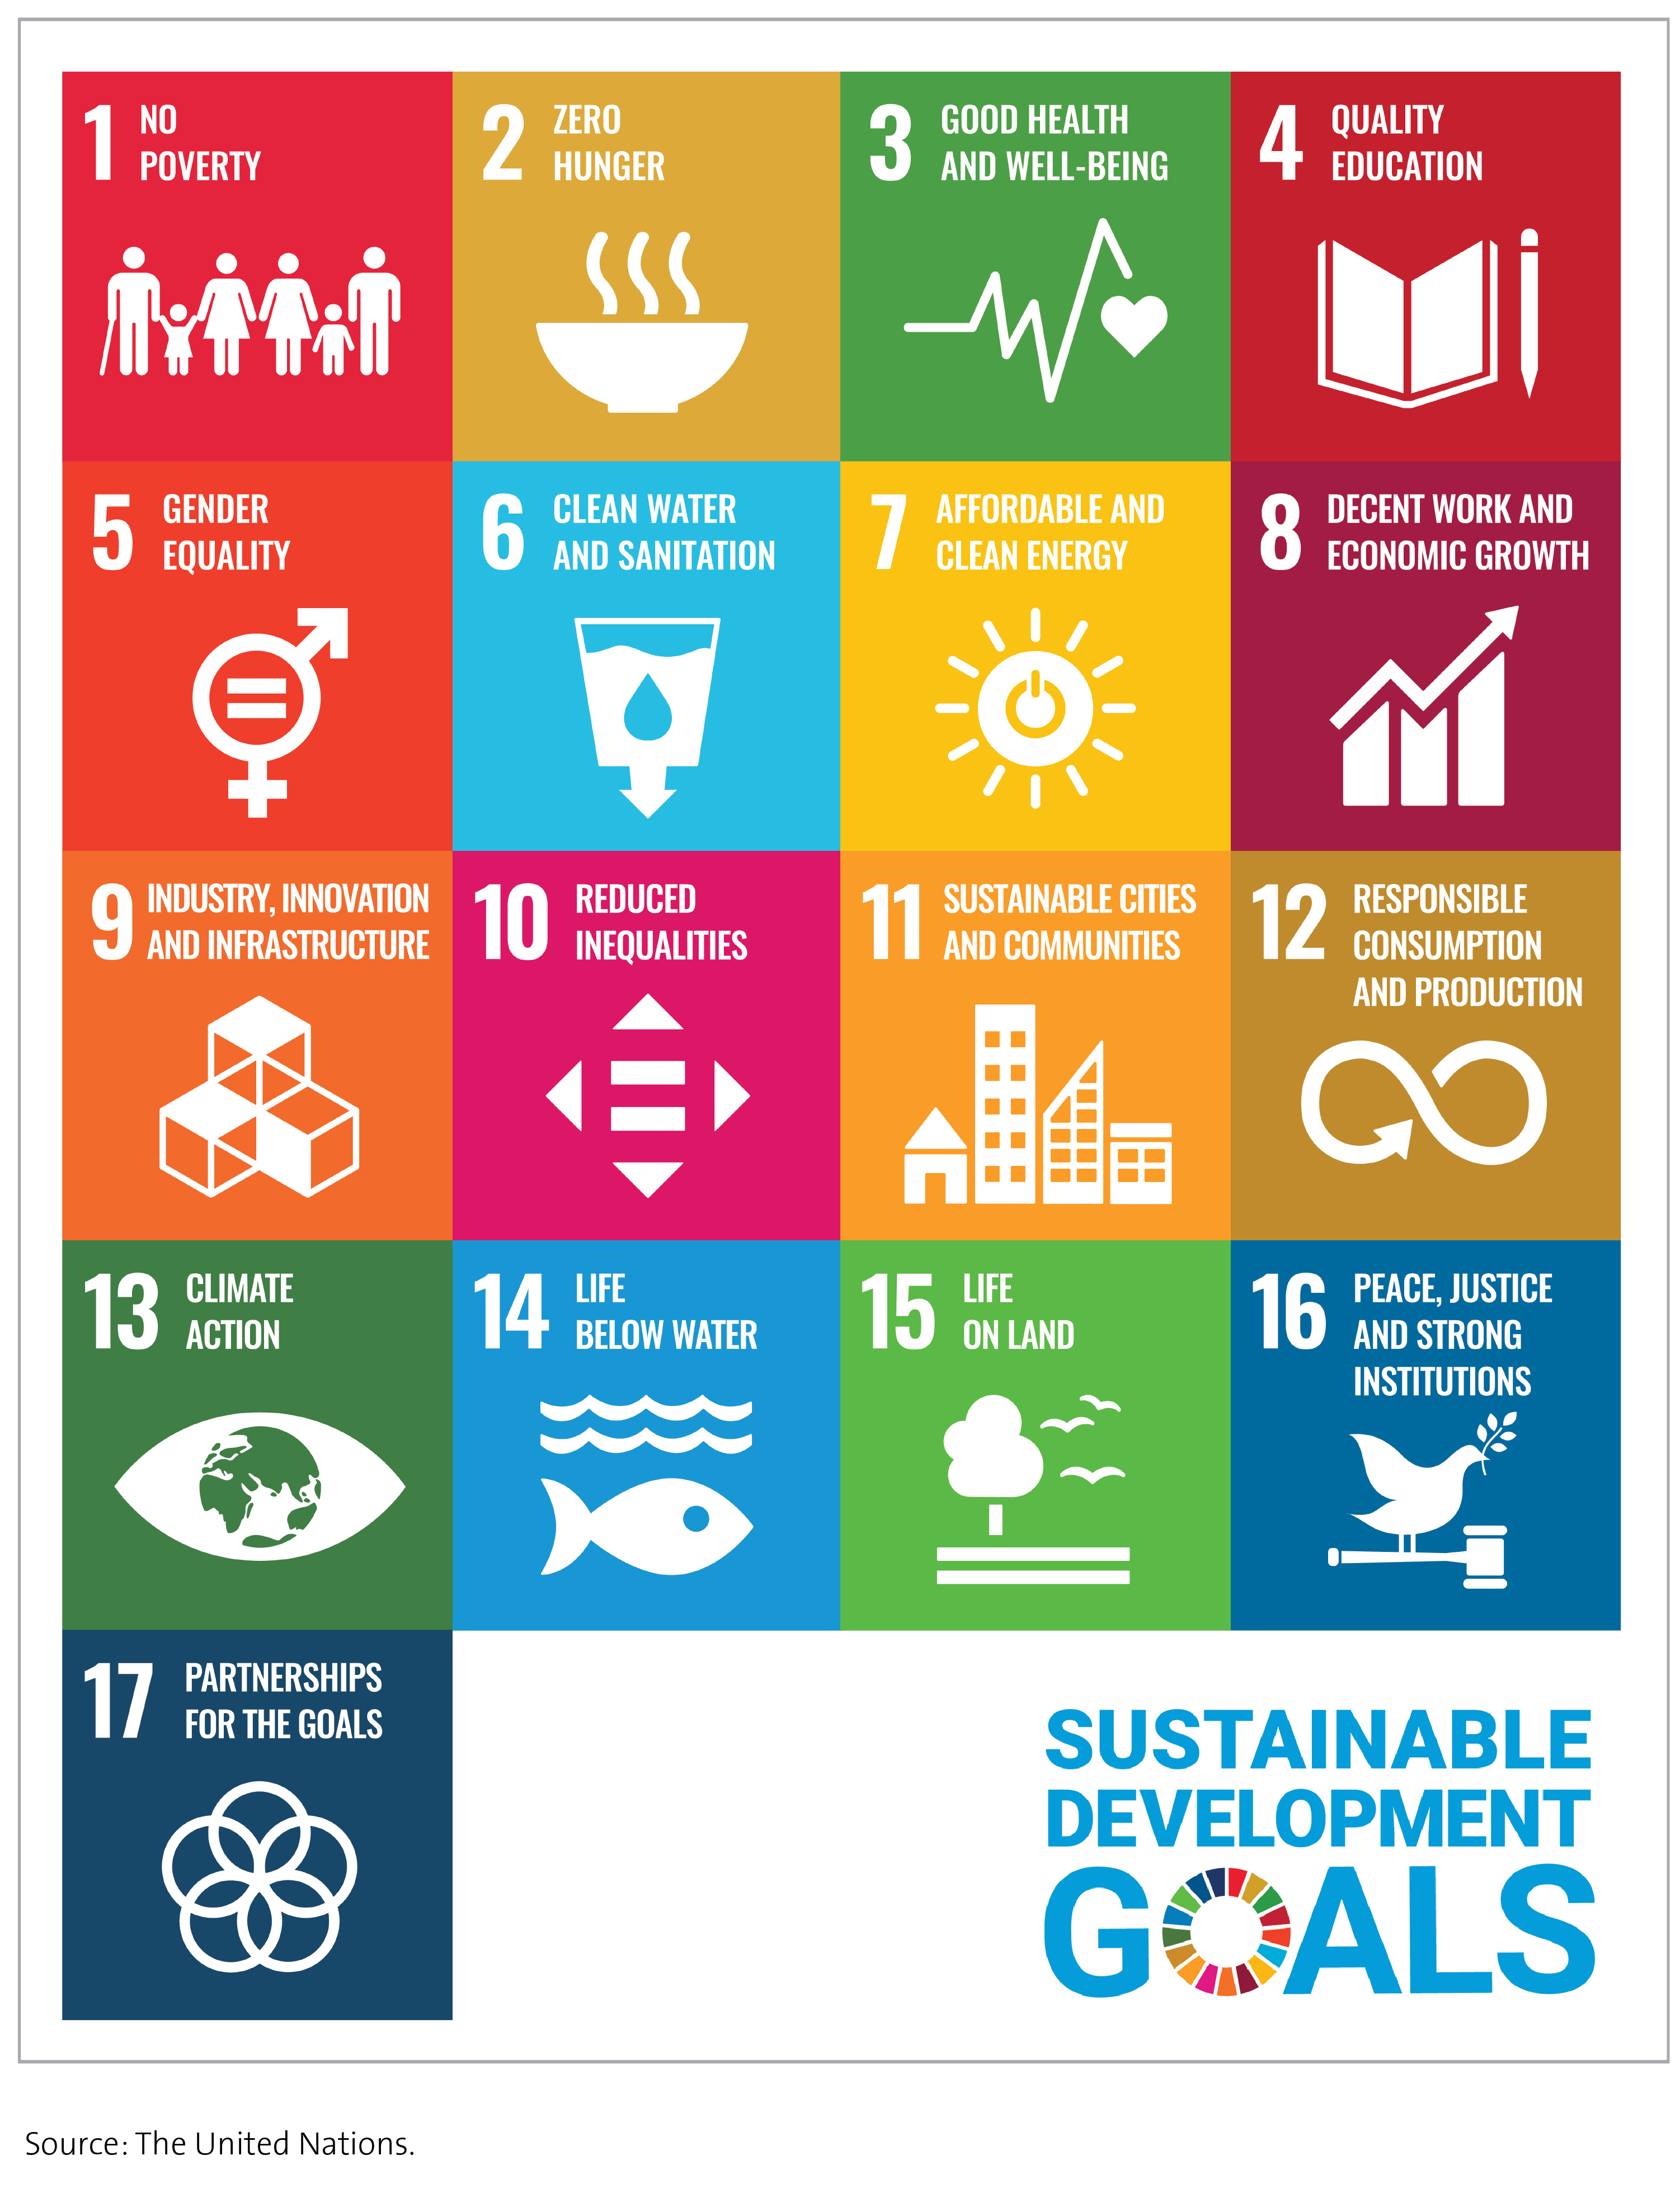 Figure 1 - The United Nations sustainable development goals